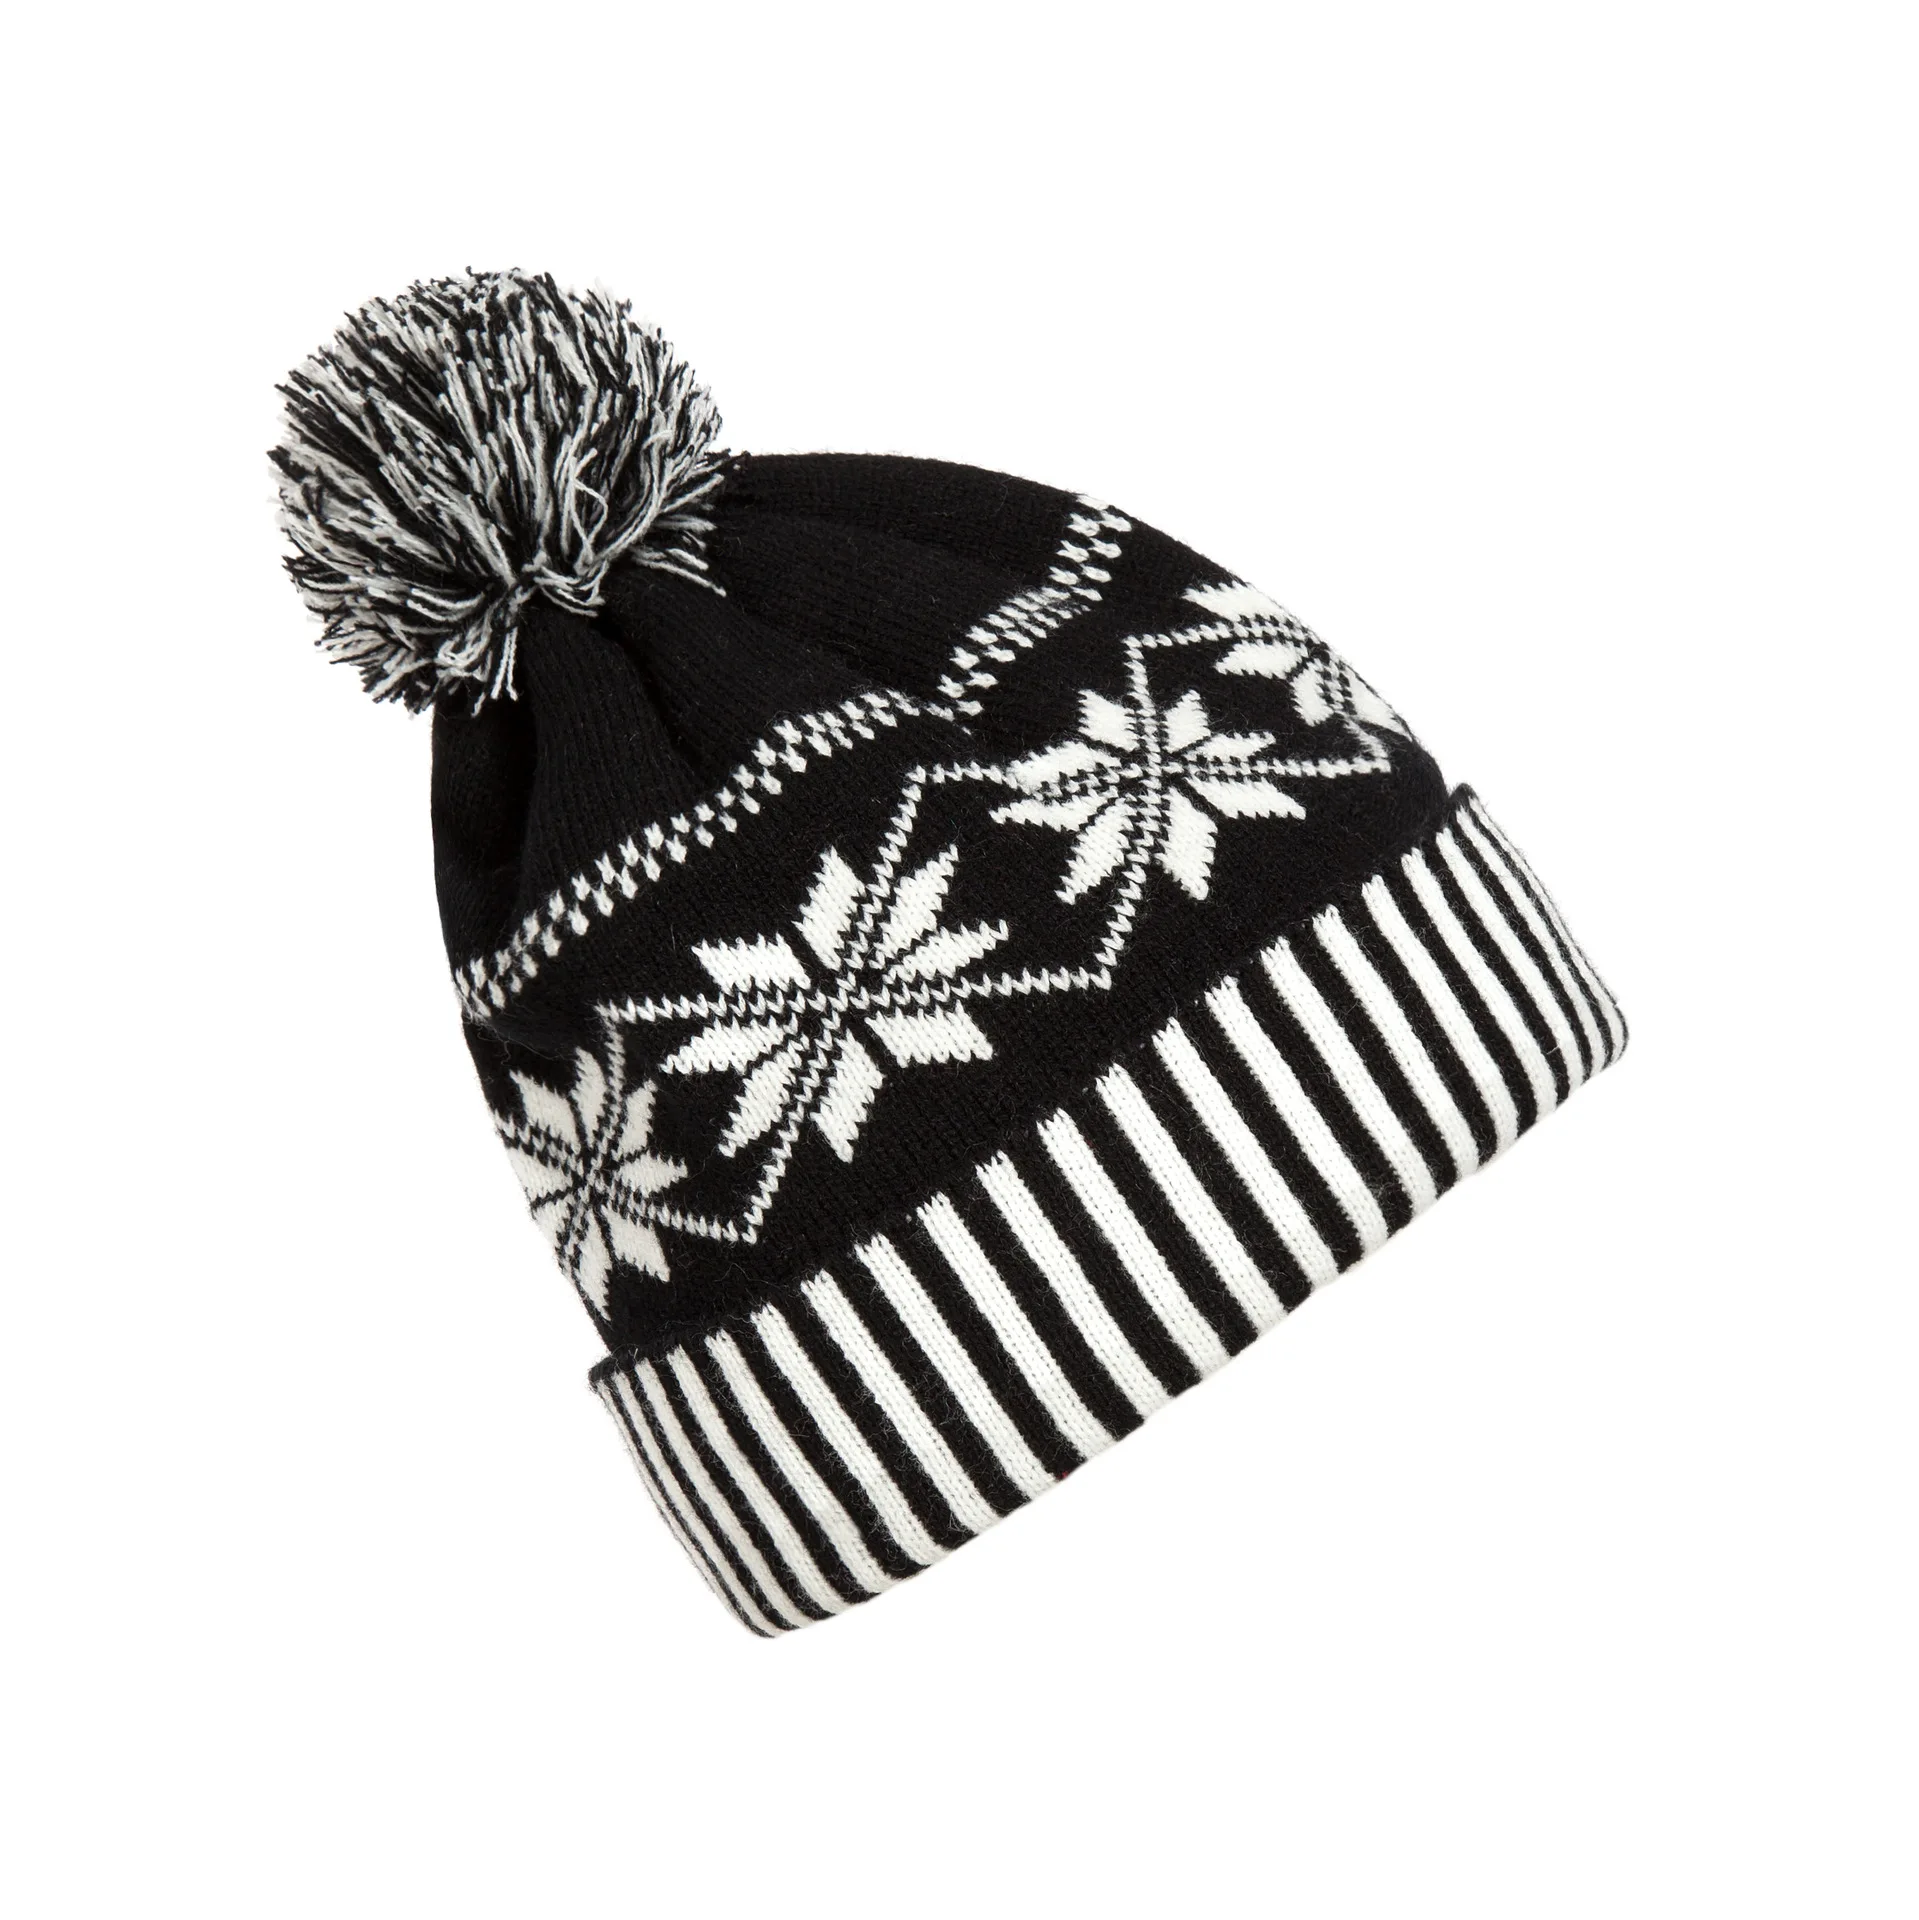 Custom Knitted Winter Jacquard Beanie Hats With Top Ball Pom Poms ...